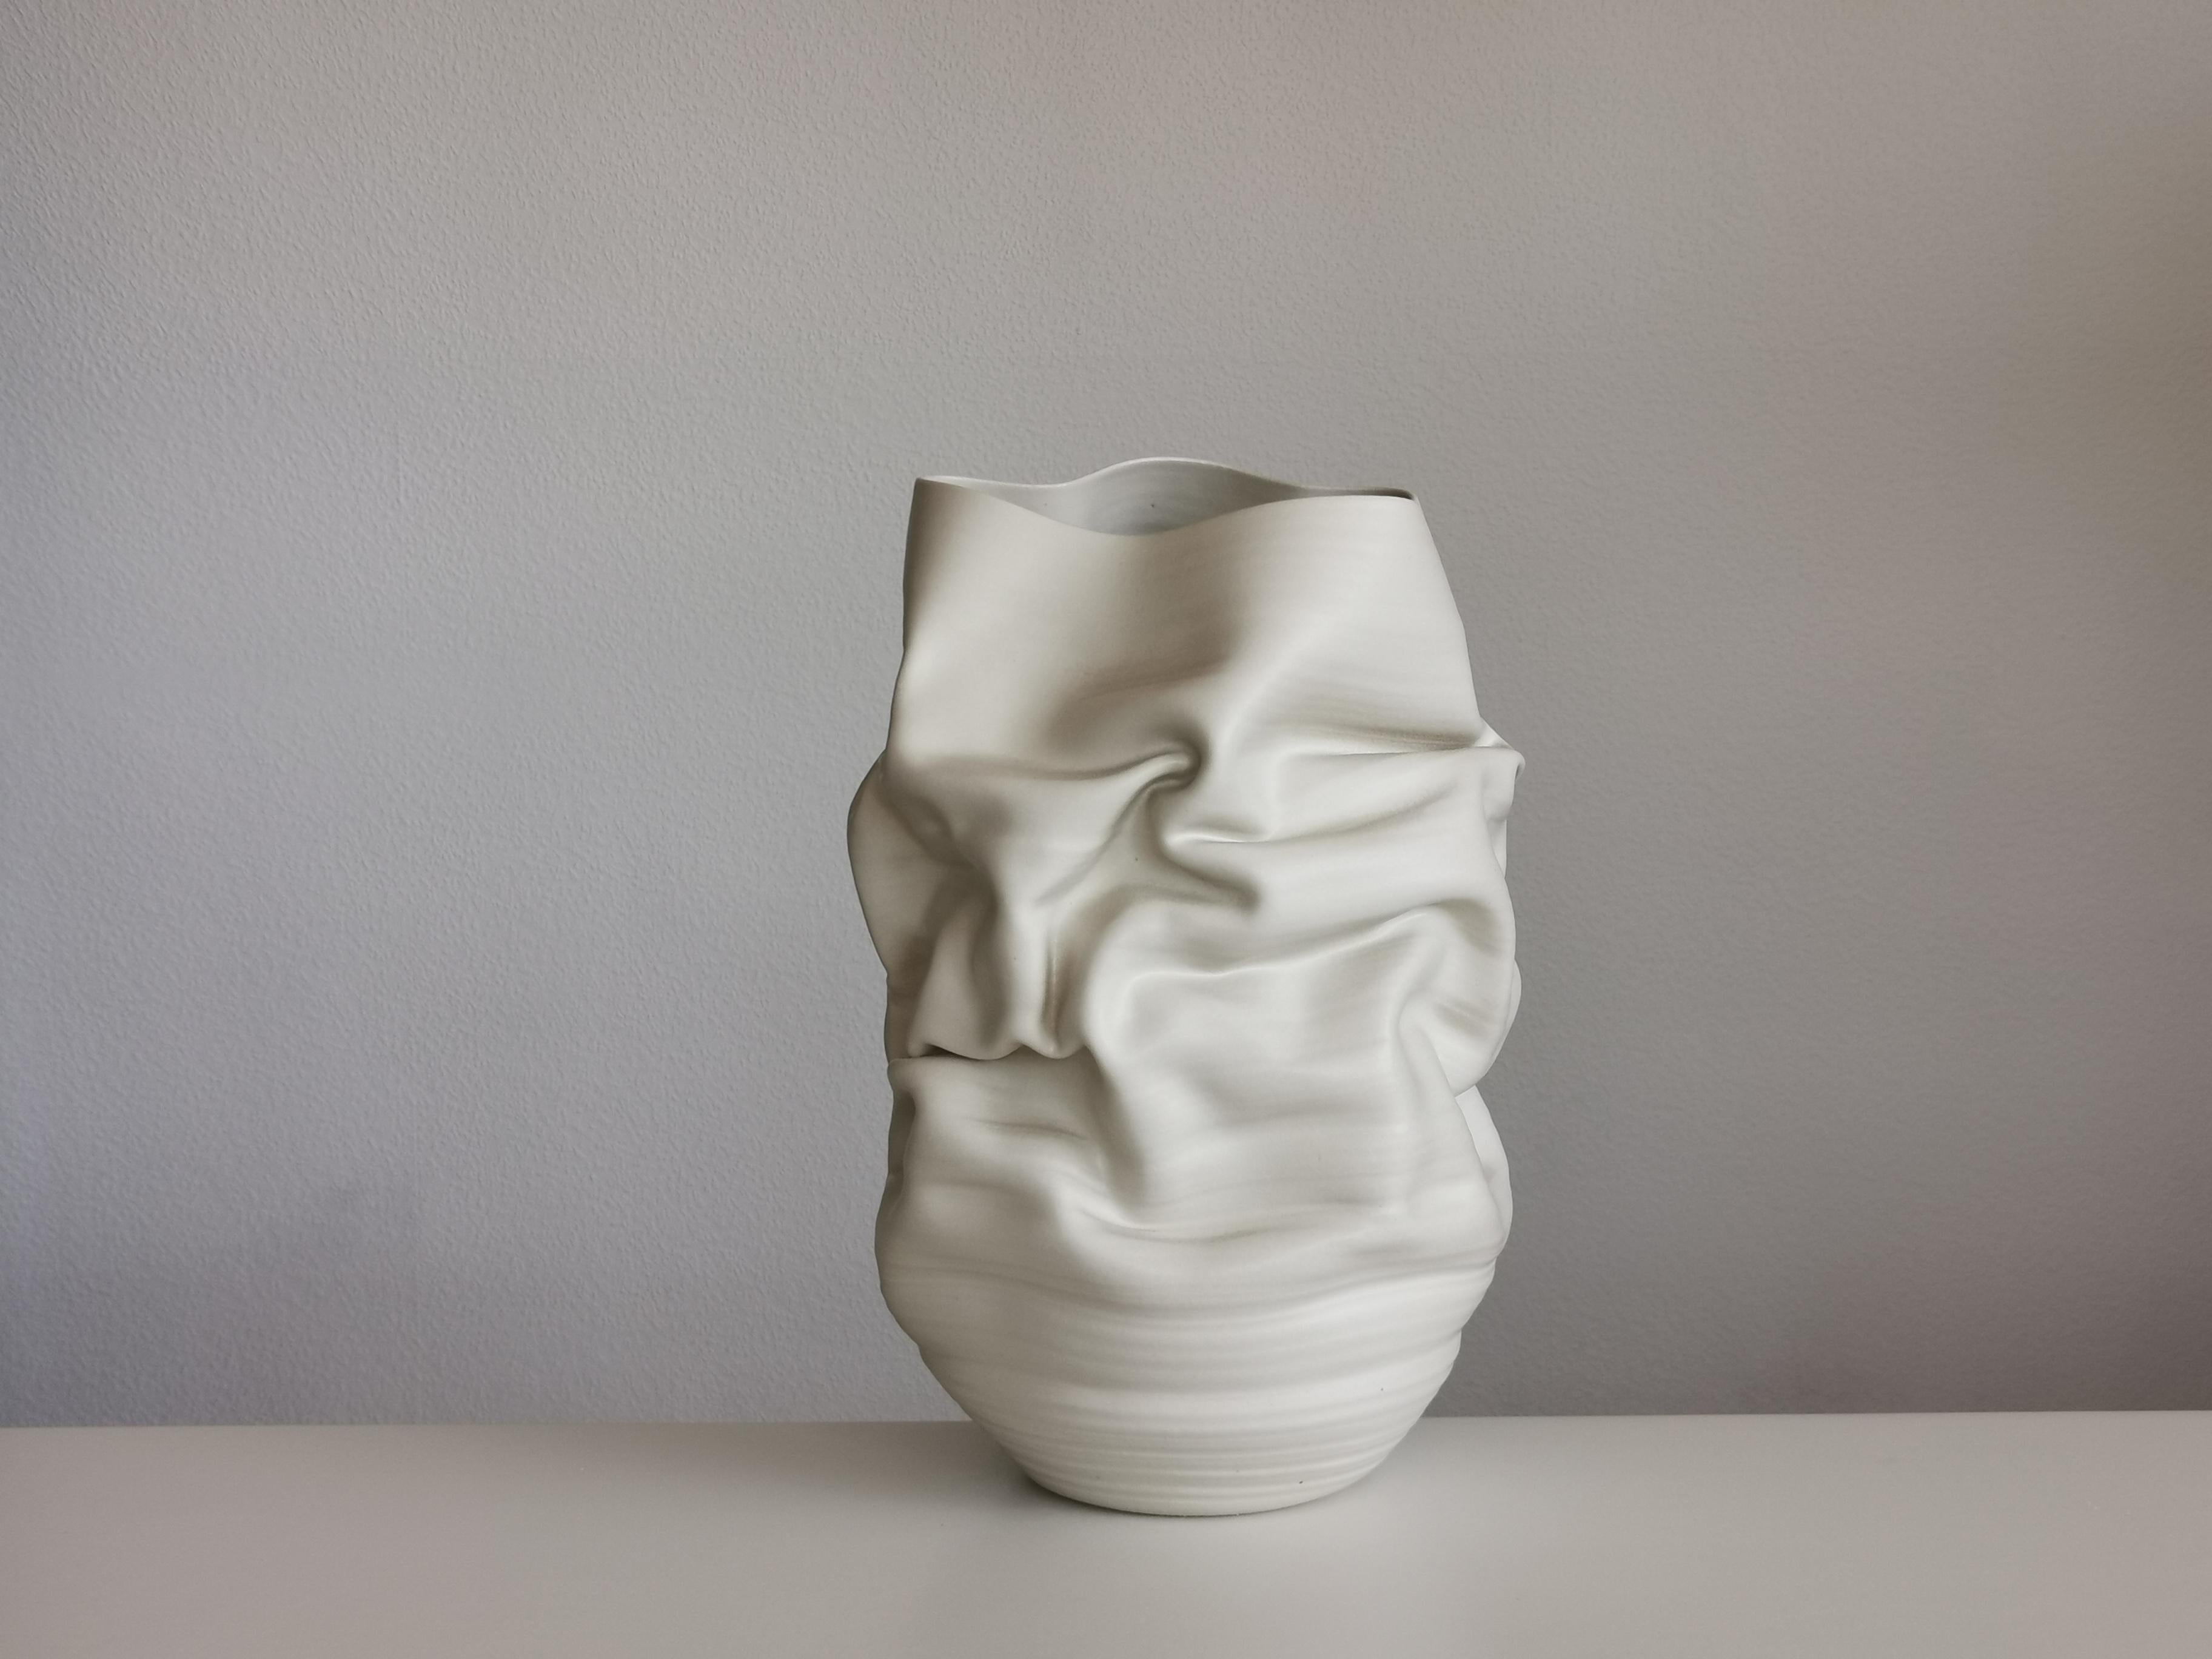 Contemporary White Deflated Crumpled Form, Vase, Interior Sculpture or Vessel, Objet D'Art